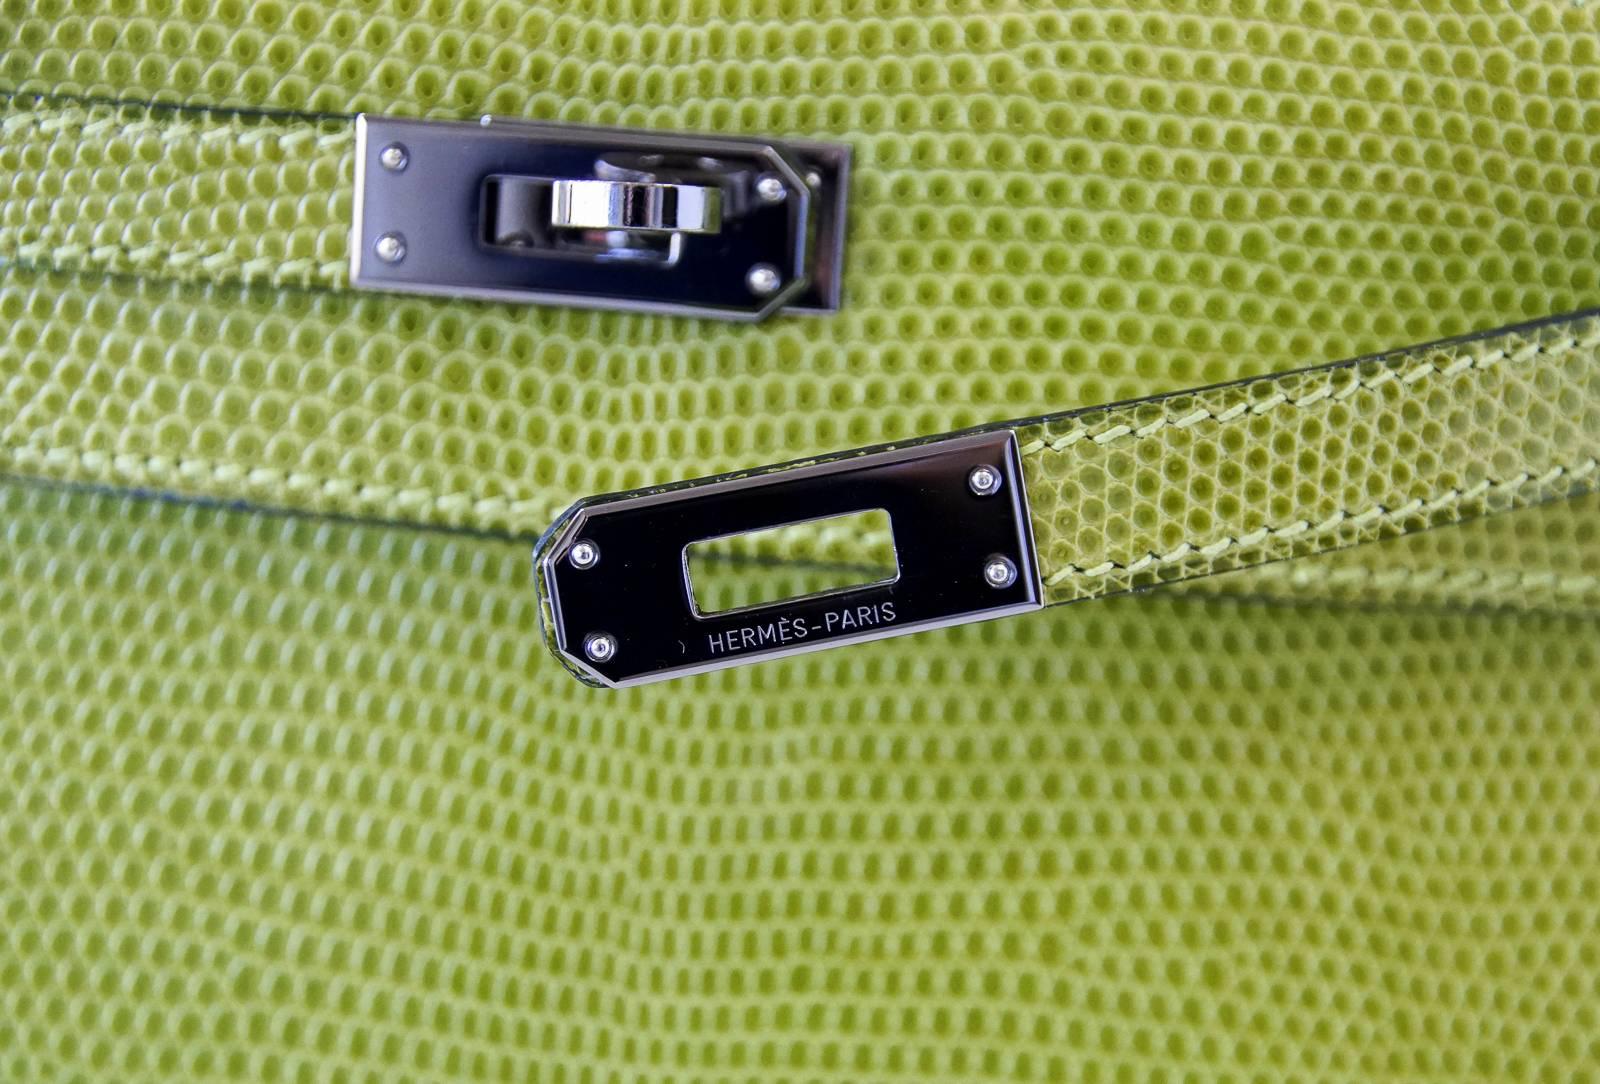 Guaranteed authentic Hermes Kelly Pochette Clutch bag Vert Anis very rare Lizard.
Fresh with Palladium hardware.
Signature stamp on interior.
Small interior compartment.
Mirror clean hardware.  
Clean handle, corners, body and interior.
Comes with